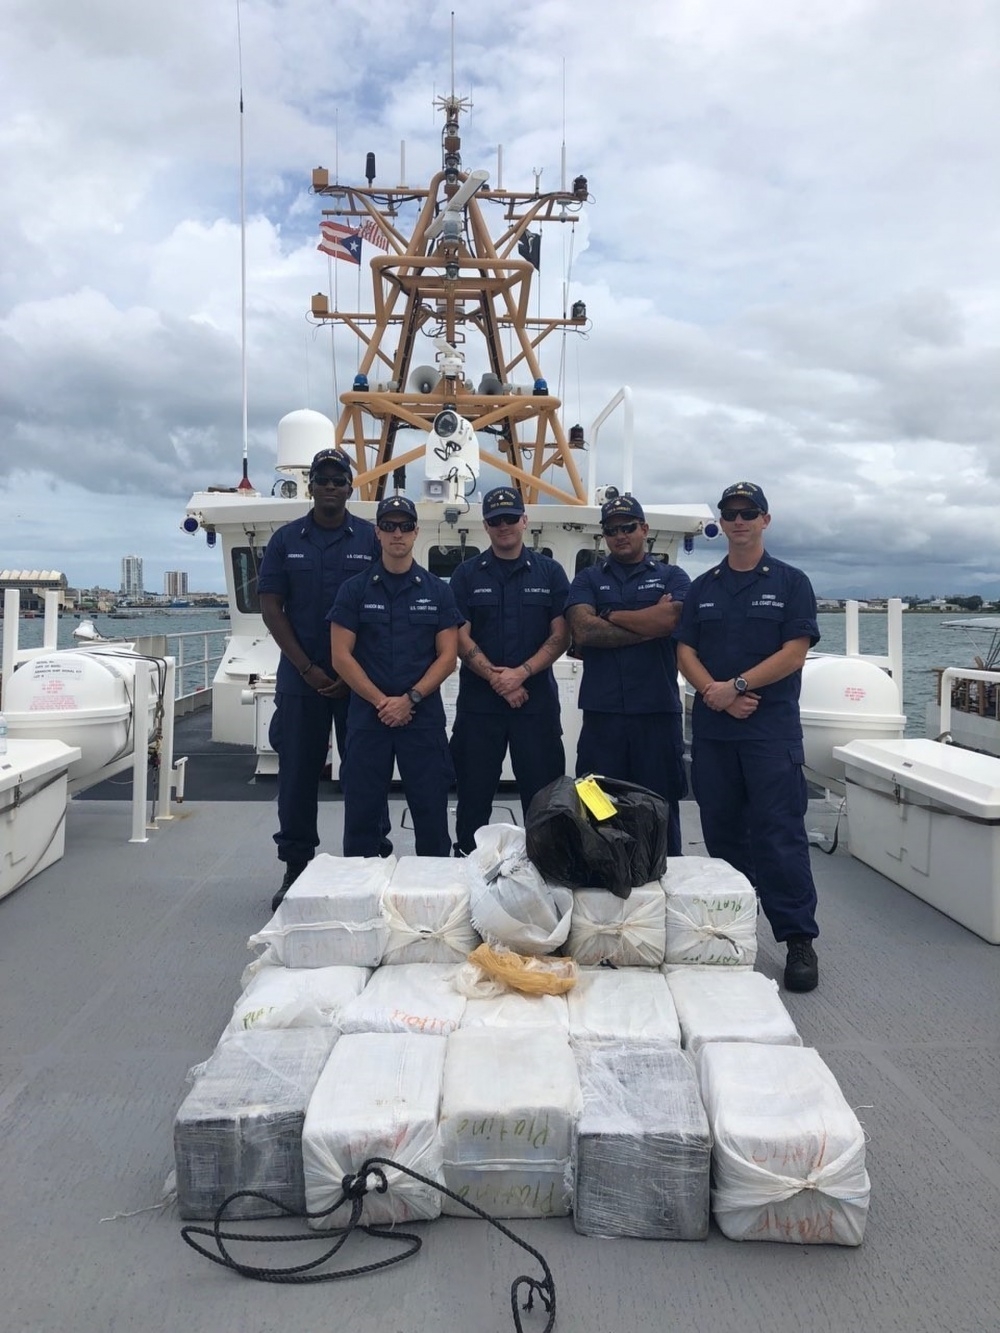 Leopardo golondrina galope US Coast Guard helps seize US$30 million in cocaine in waters off Puerto  Rico - Baird Maritime